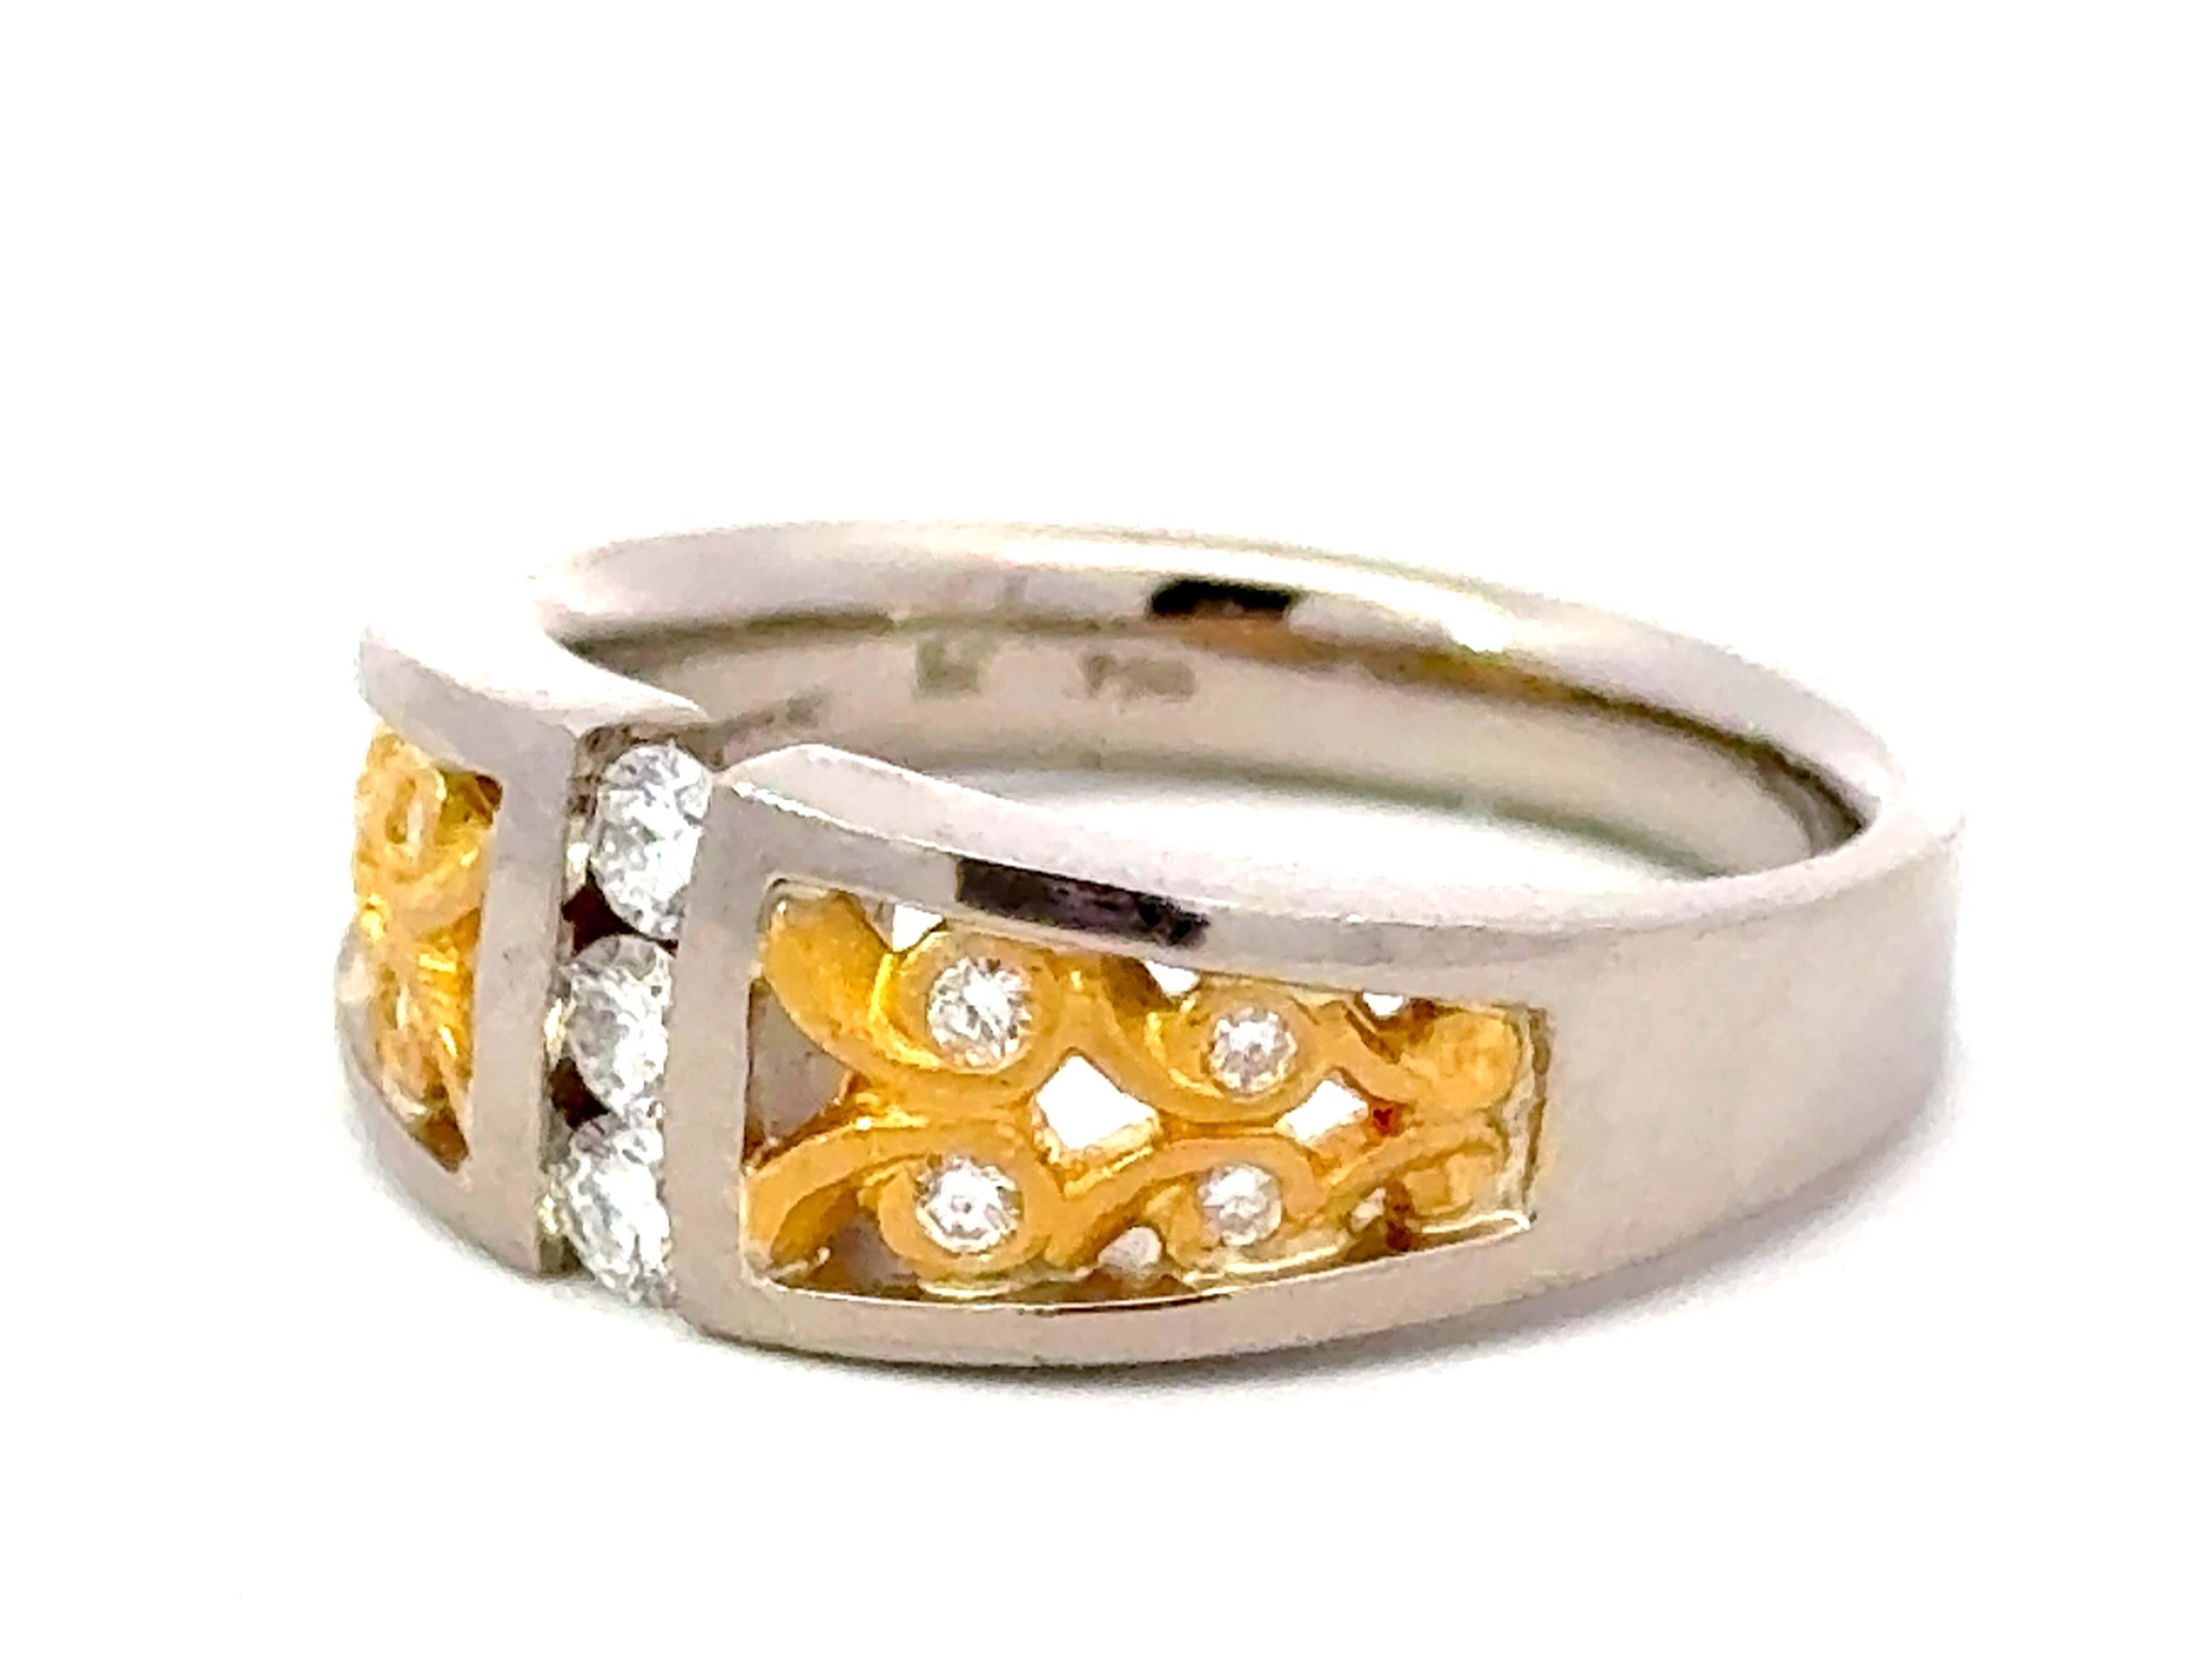 Brilliant Cut Vertical Diamond Row Ring 18K and 24K Yellow and White Gold In Excellent Condition For Sale In Honolulu, HI